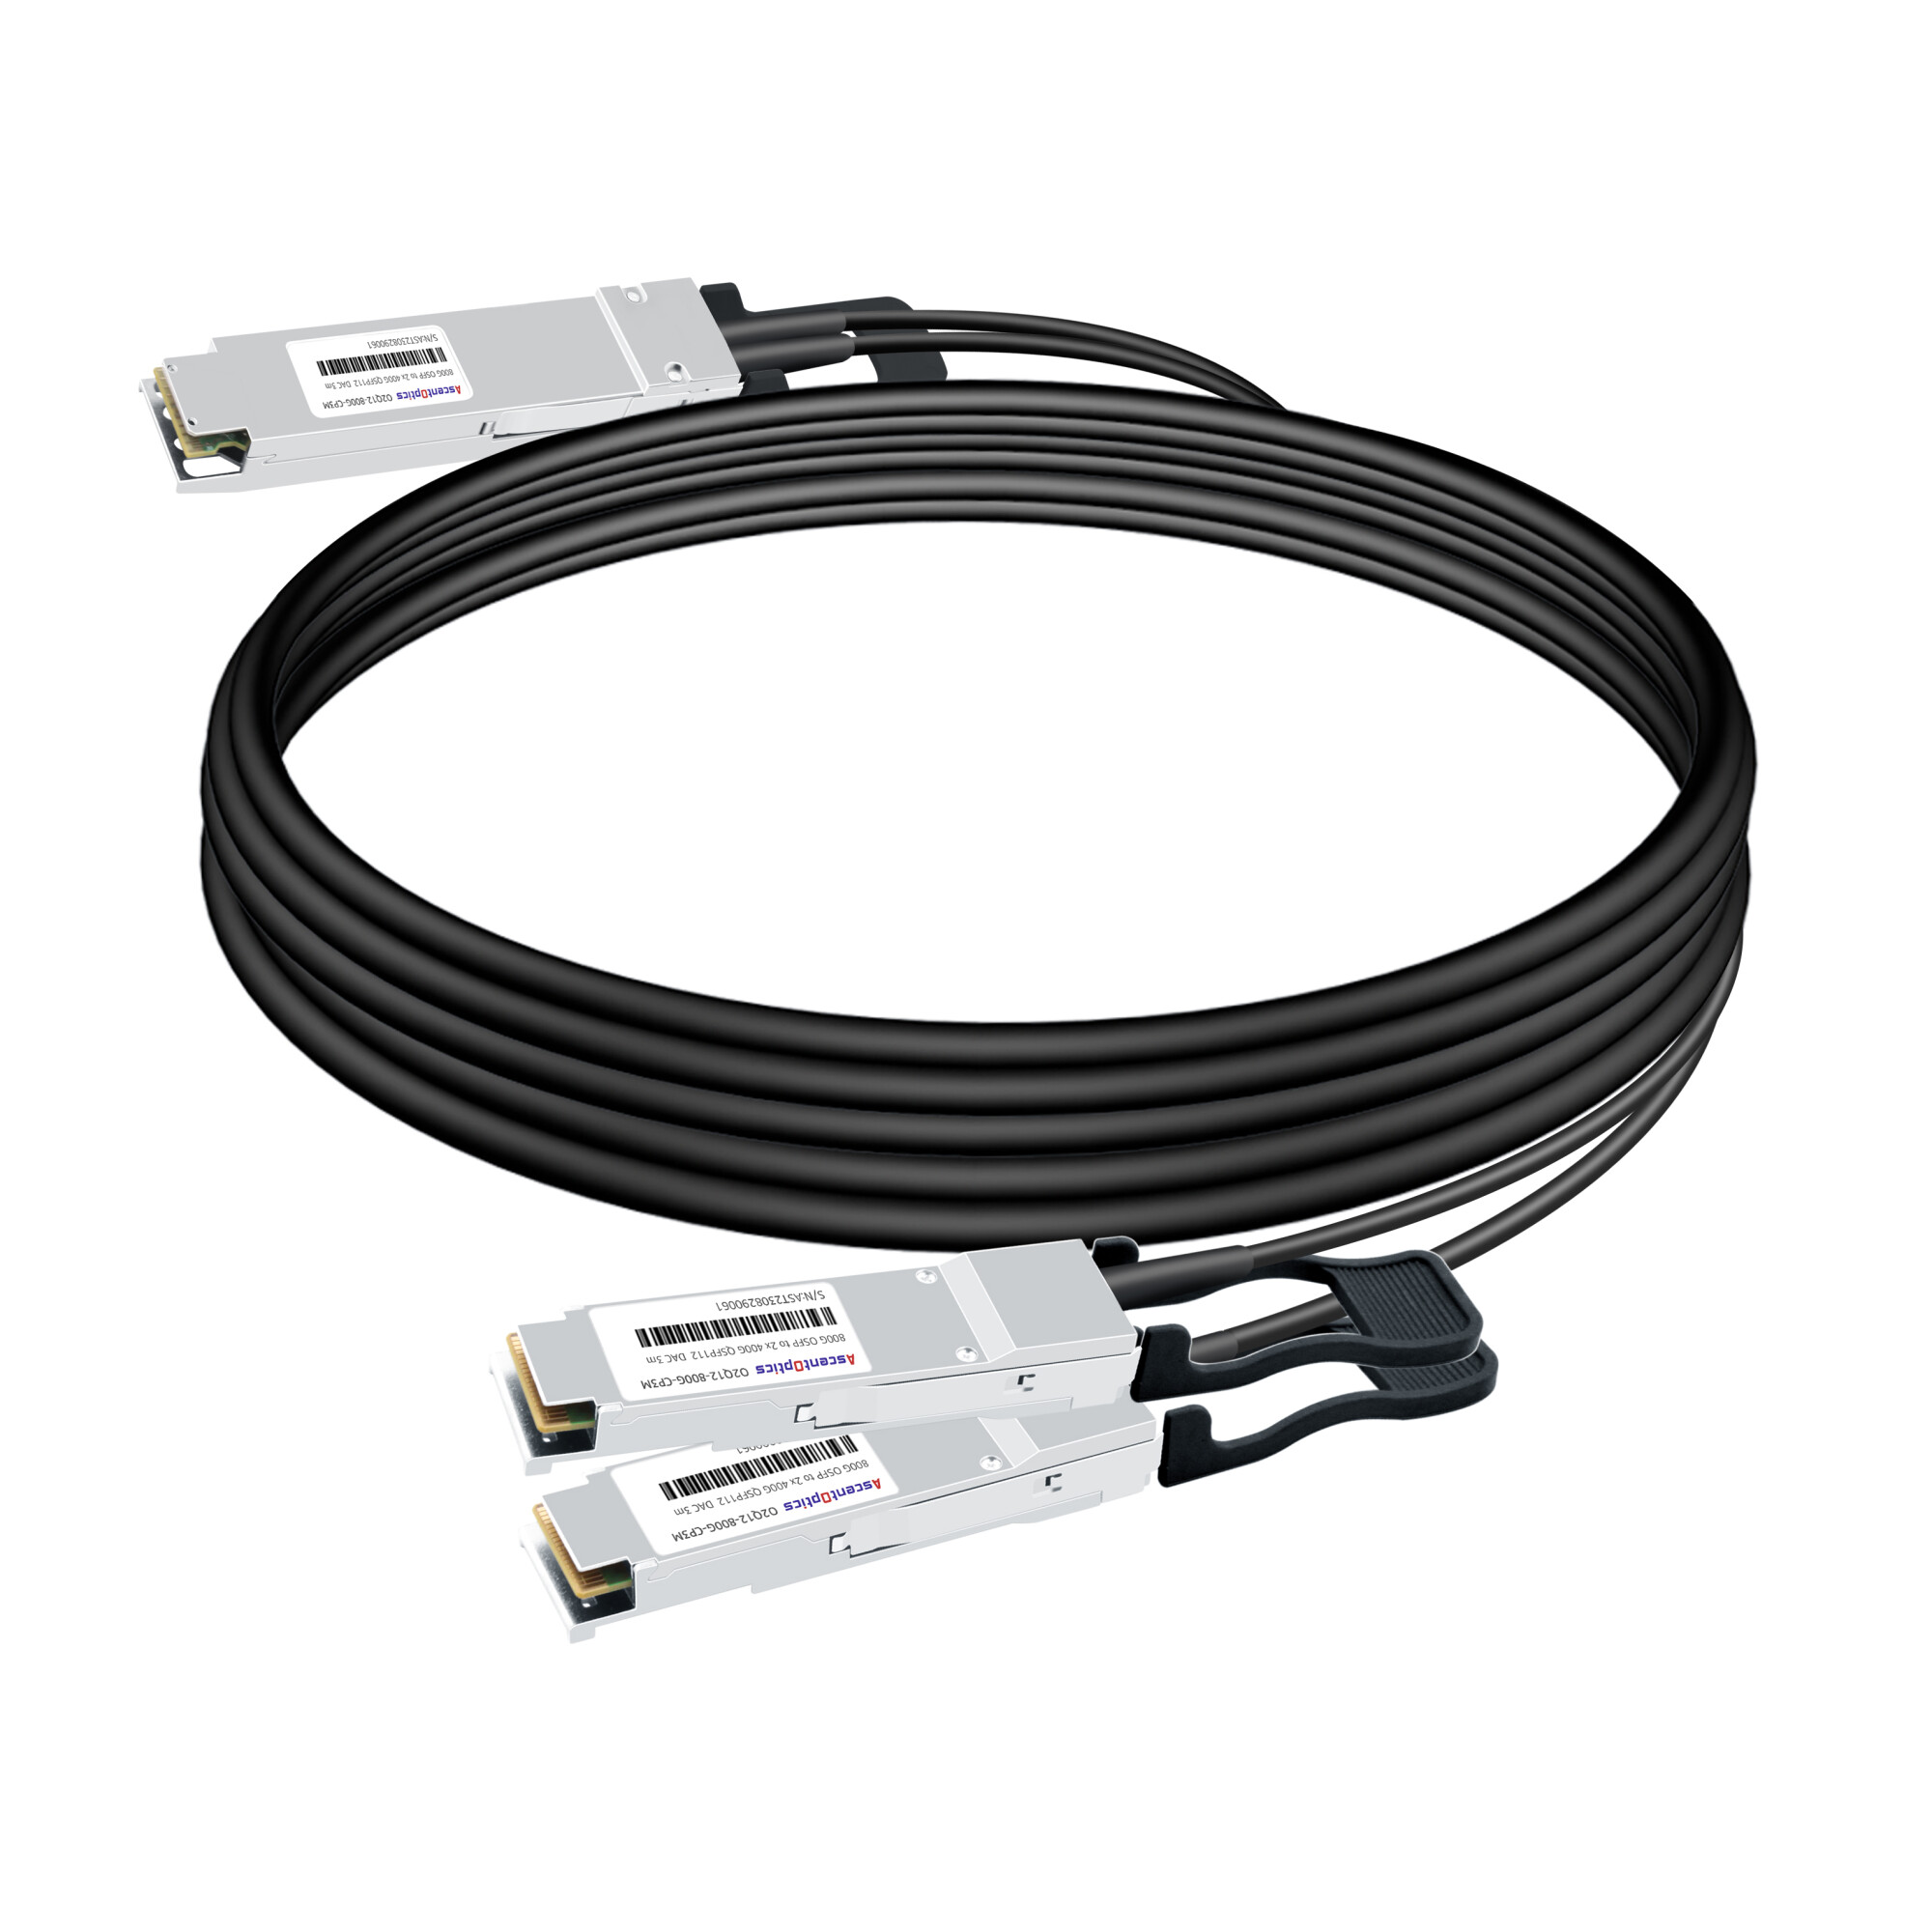 800G OSFP to 2x 400G QSFP112 Copper Breakout Cable,3 Meter